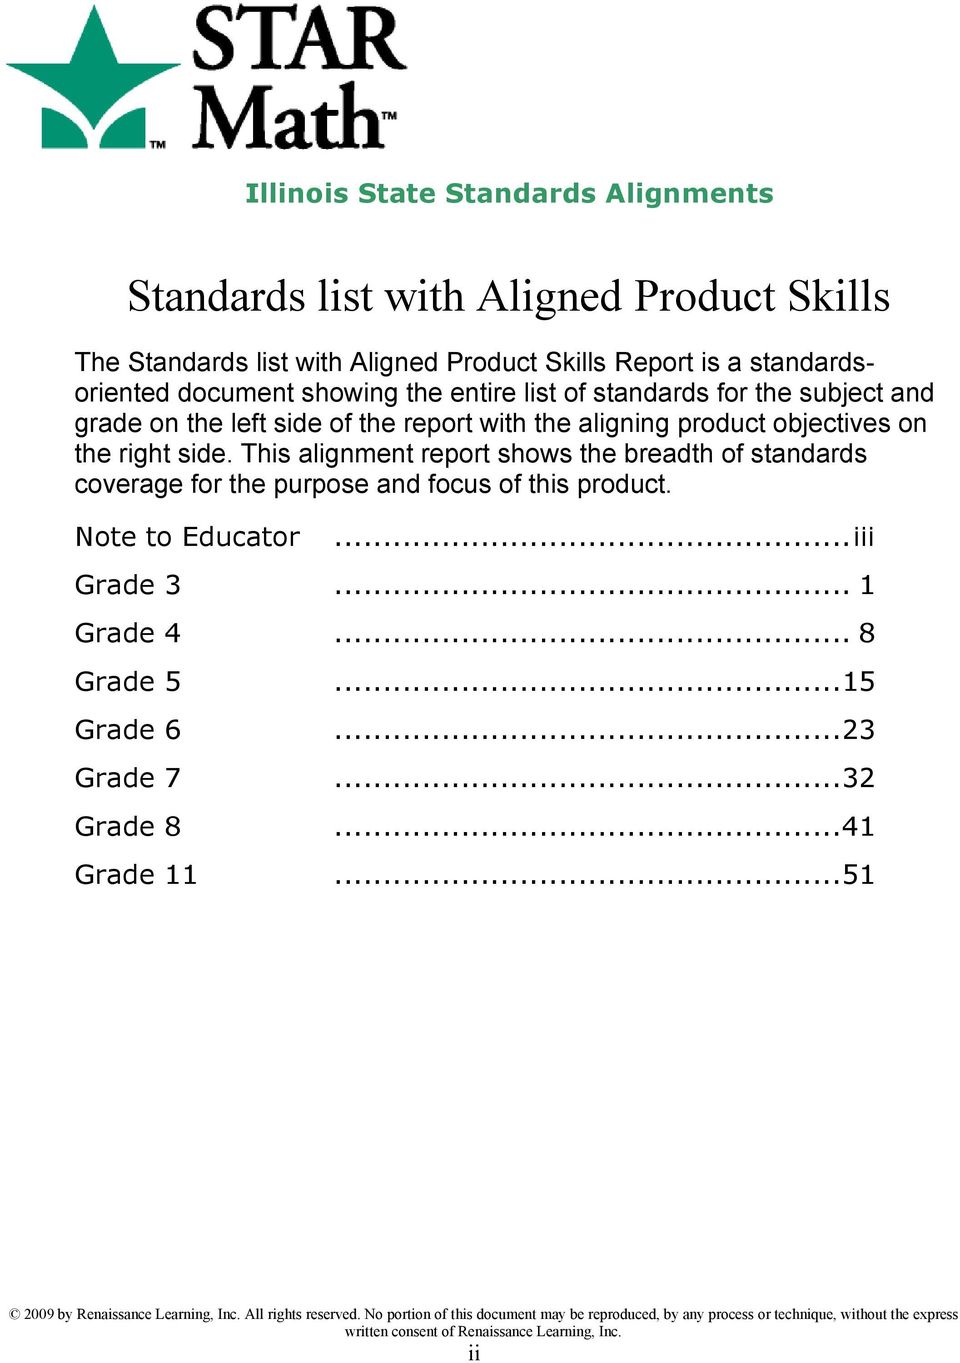 This alignment report shows the breadth of standards coverage for the purpose and focus of this product. Note to Educator...iii Grade 3... 1 Grade 4... 8 Grade 5...15 Grade 6.